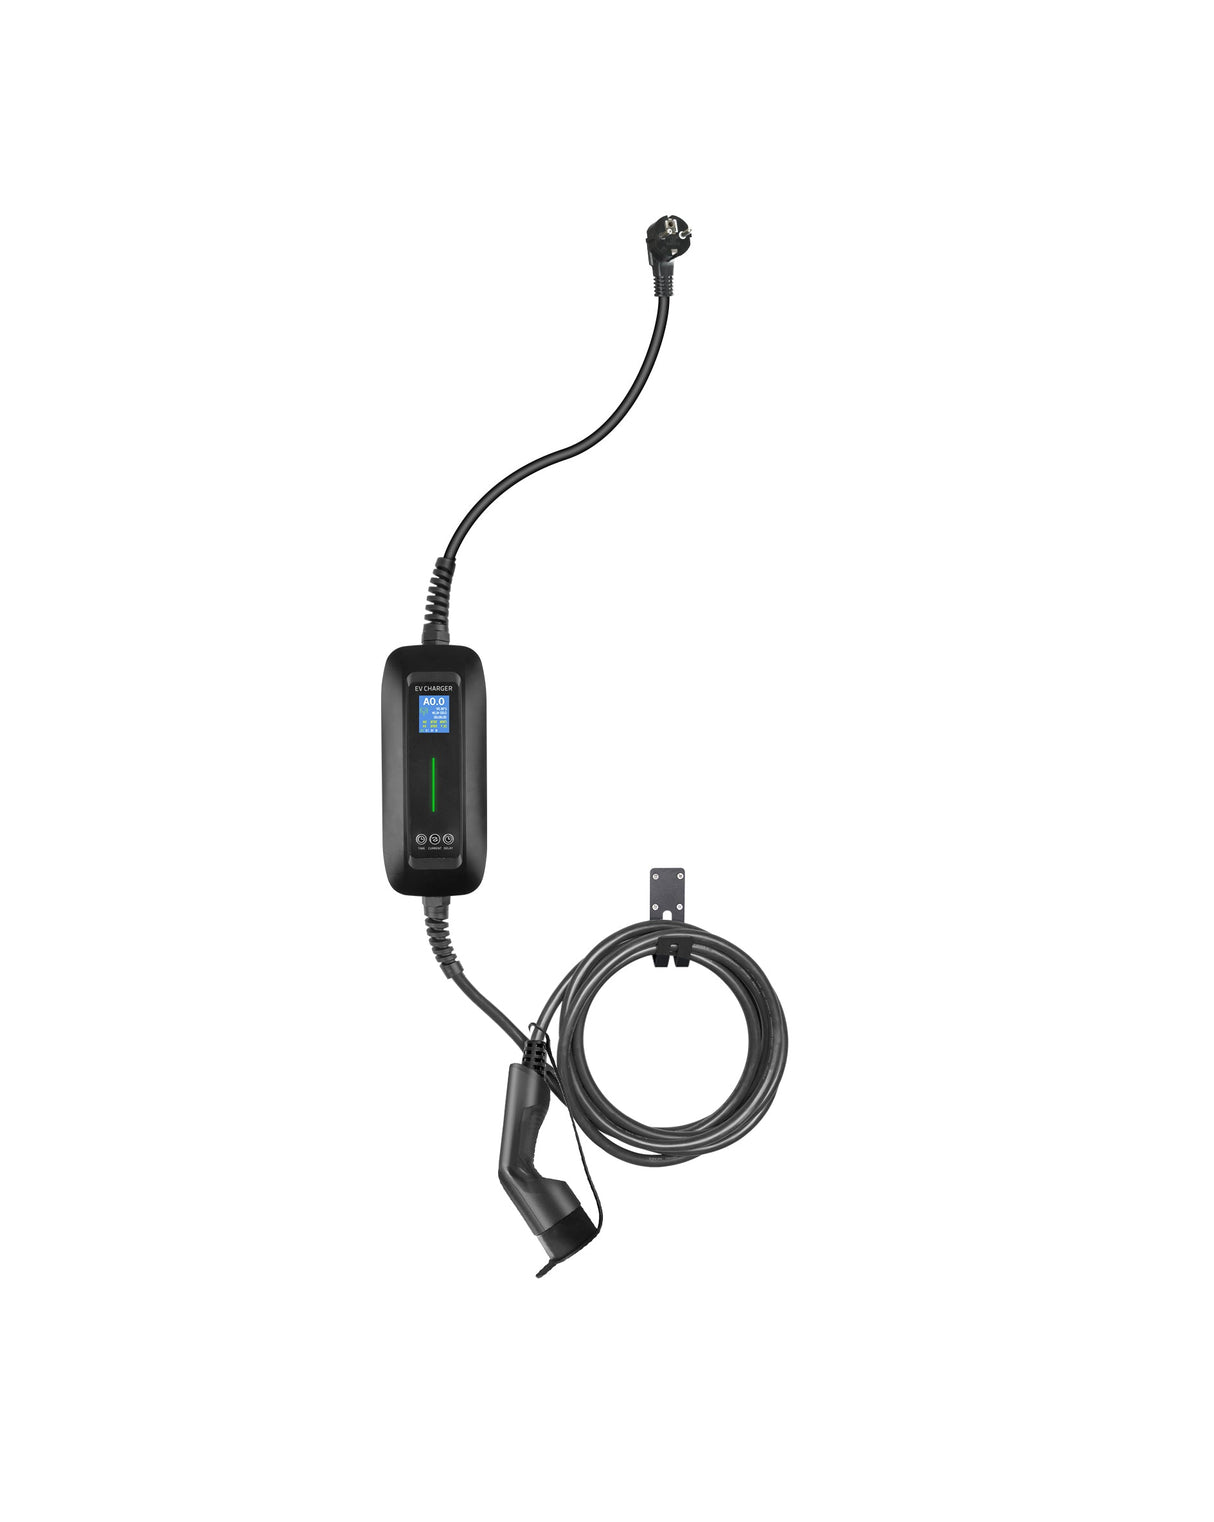 Mobile Charger Polestar 2 - Besen with LCD, Delayed Charging &amp; Memory Function - Type 2 to Schuko - Max 16A